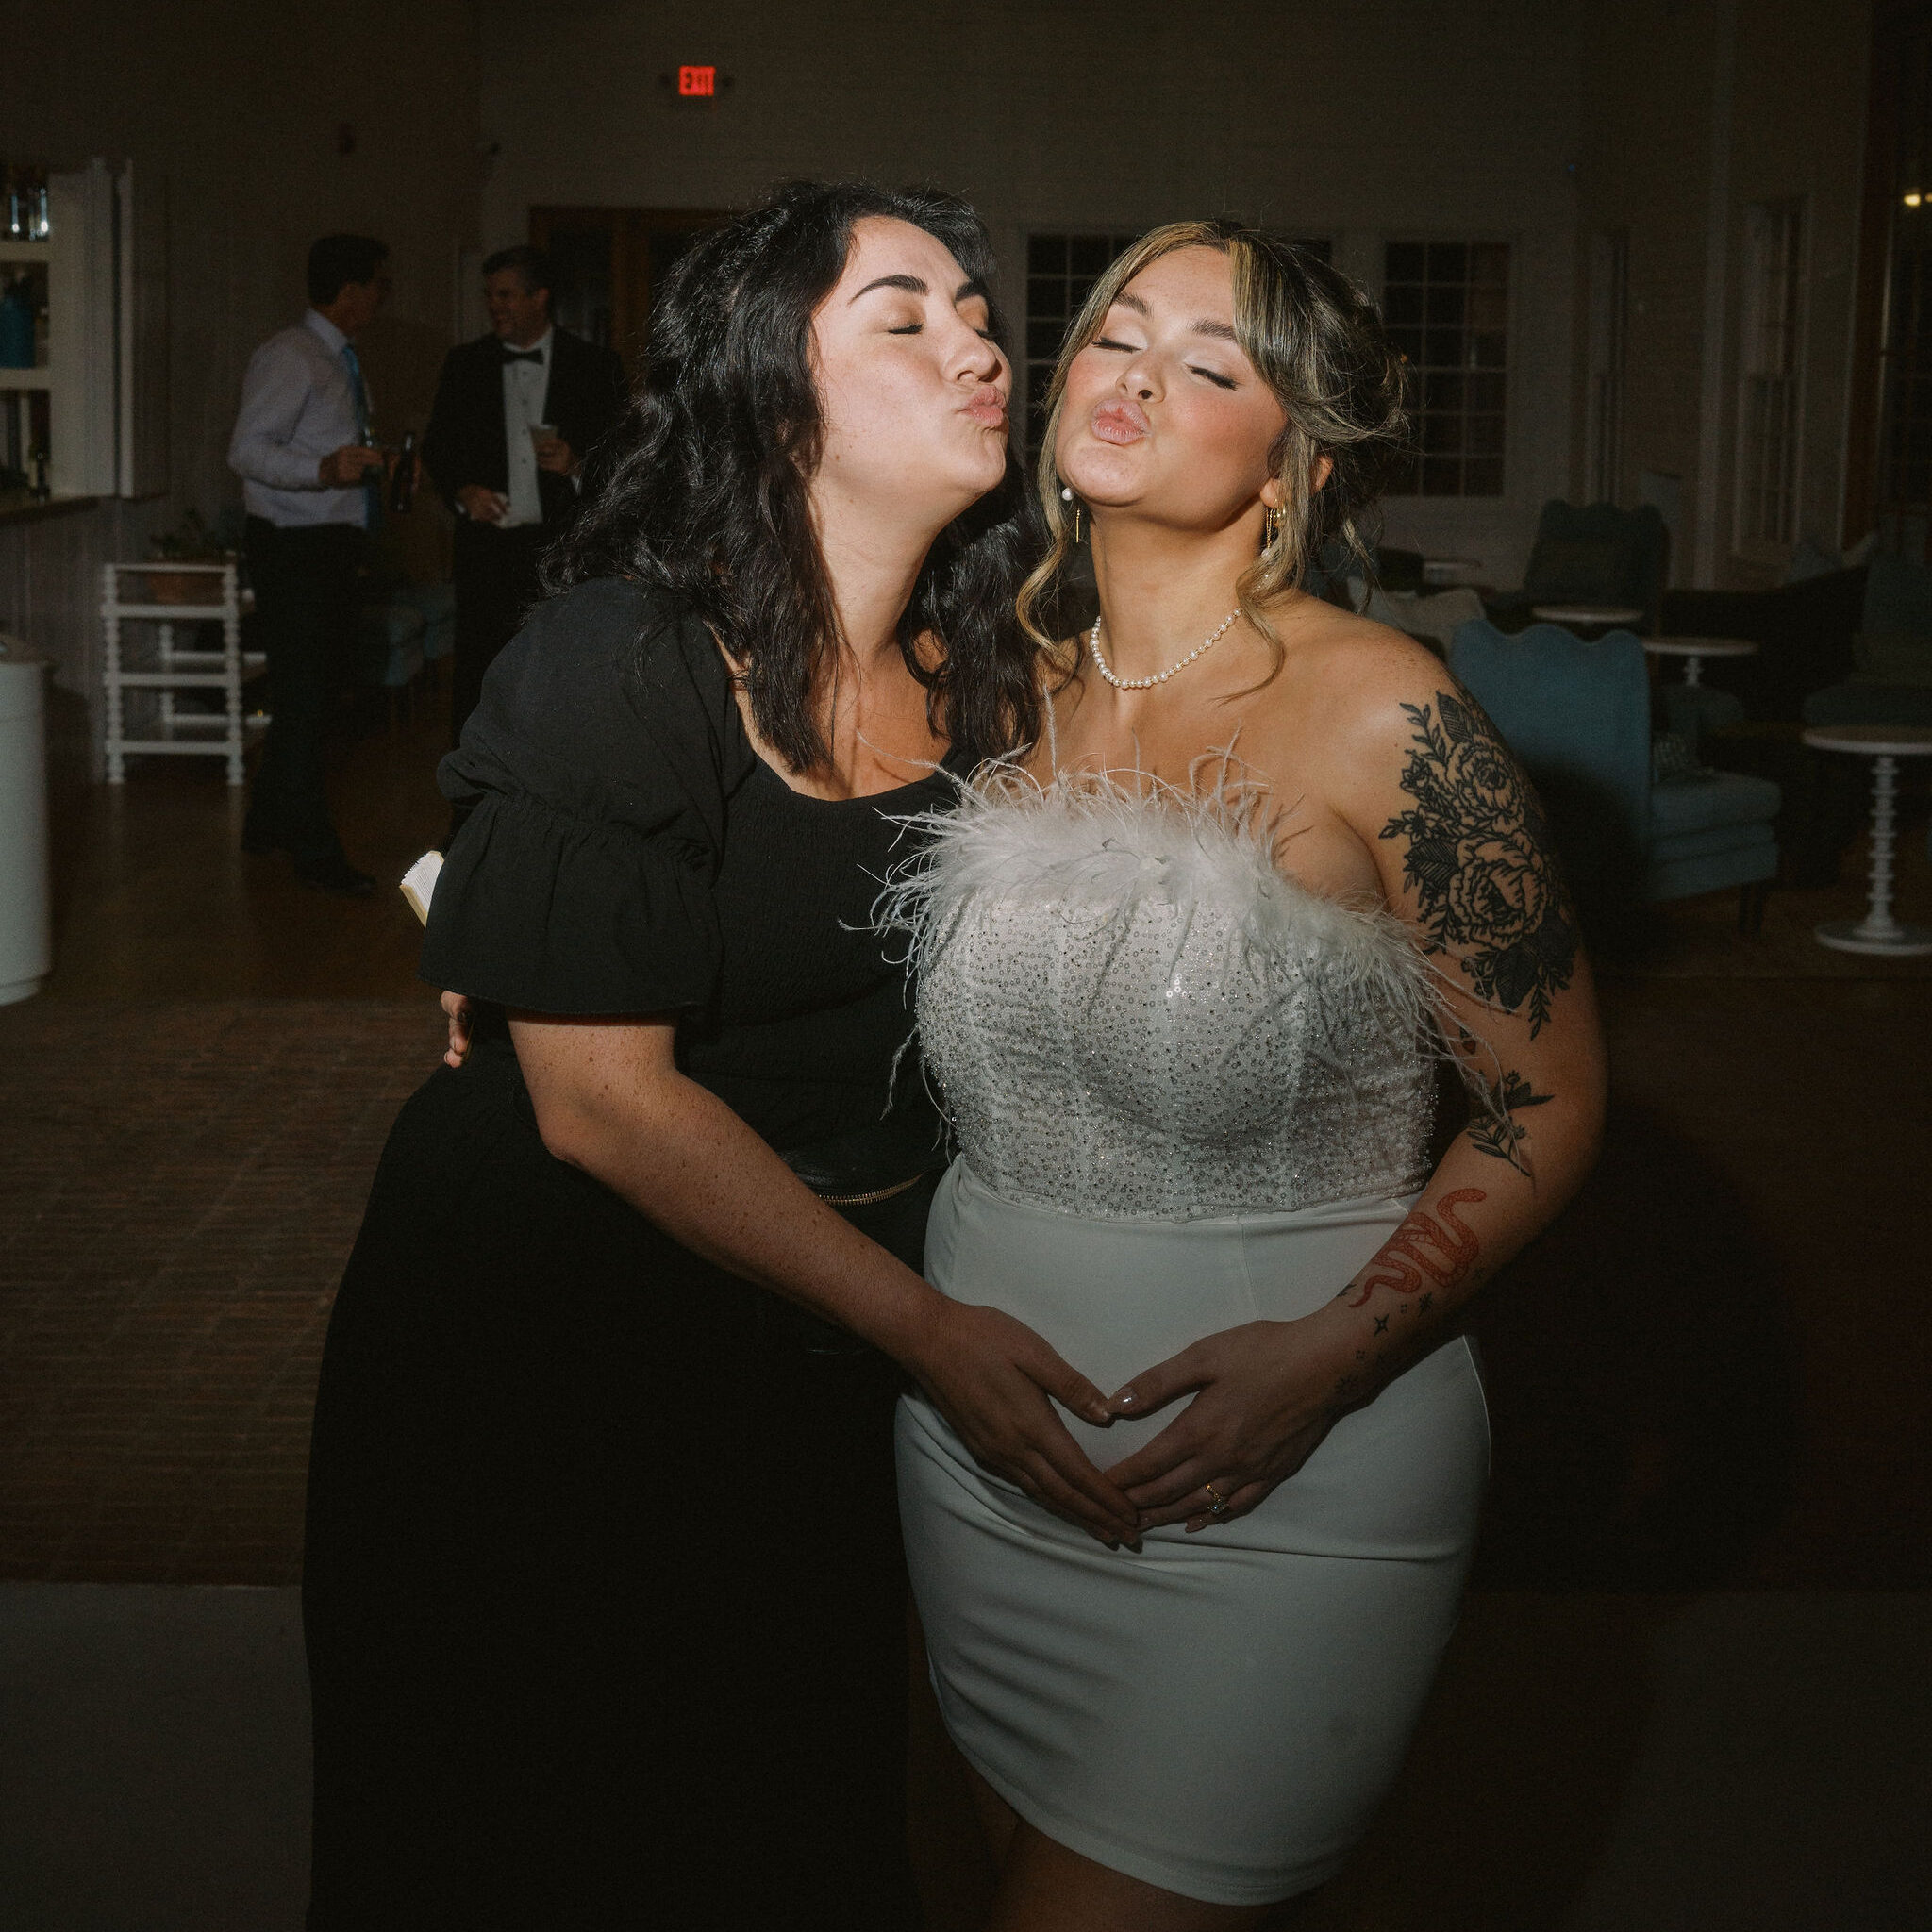 Austin wedding planner Bianca Nichole and Co posting with bride, holding baby bump